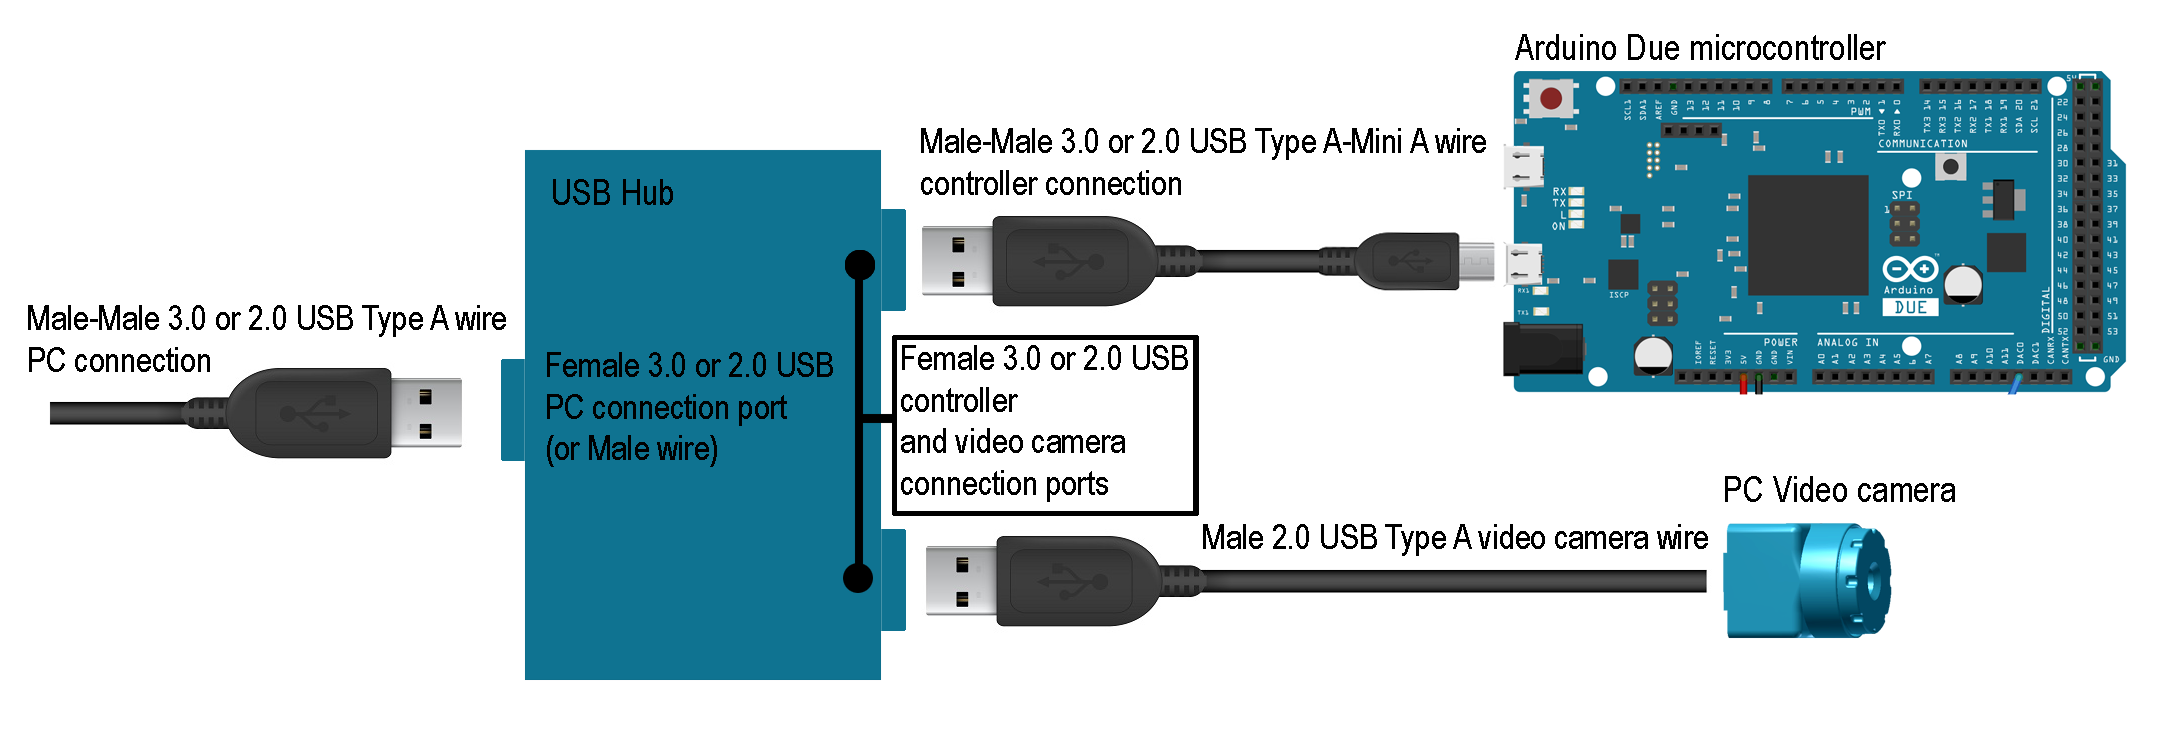 USB Hub device for connection with Arduino Due microcontroller and video camera scheme - Pololu